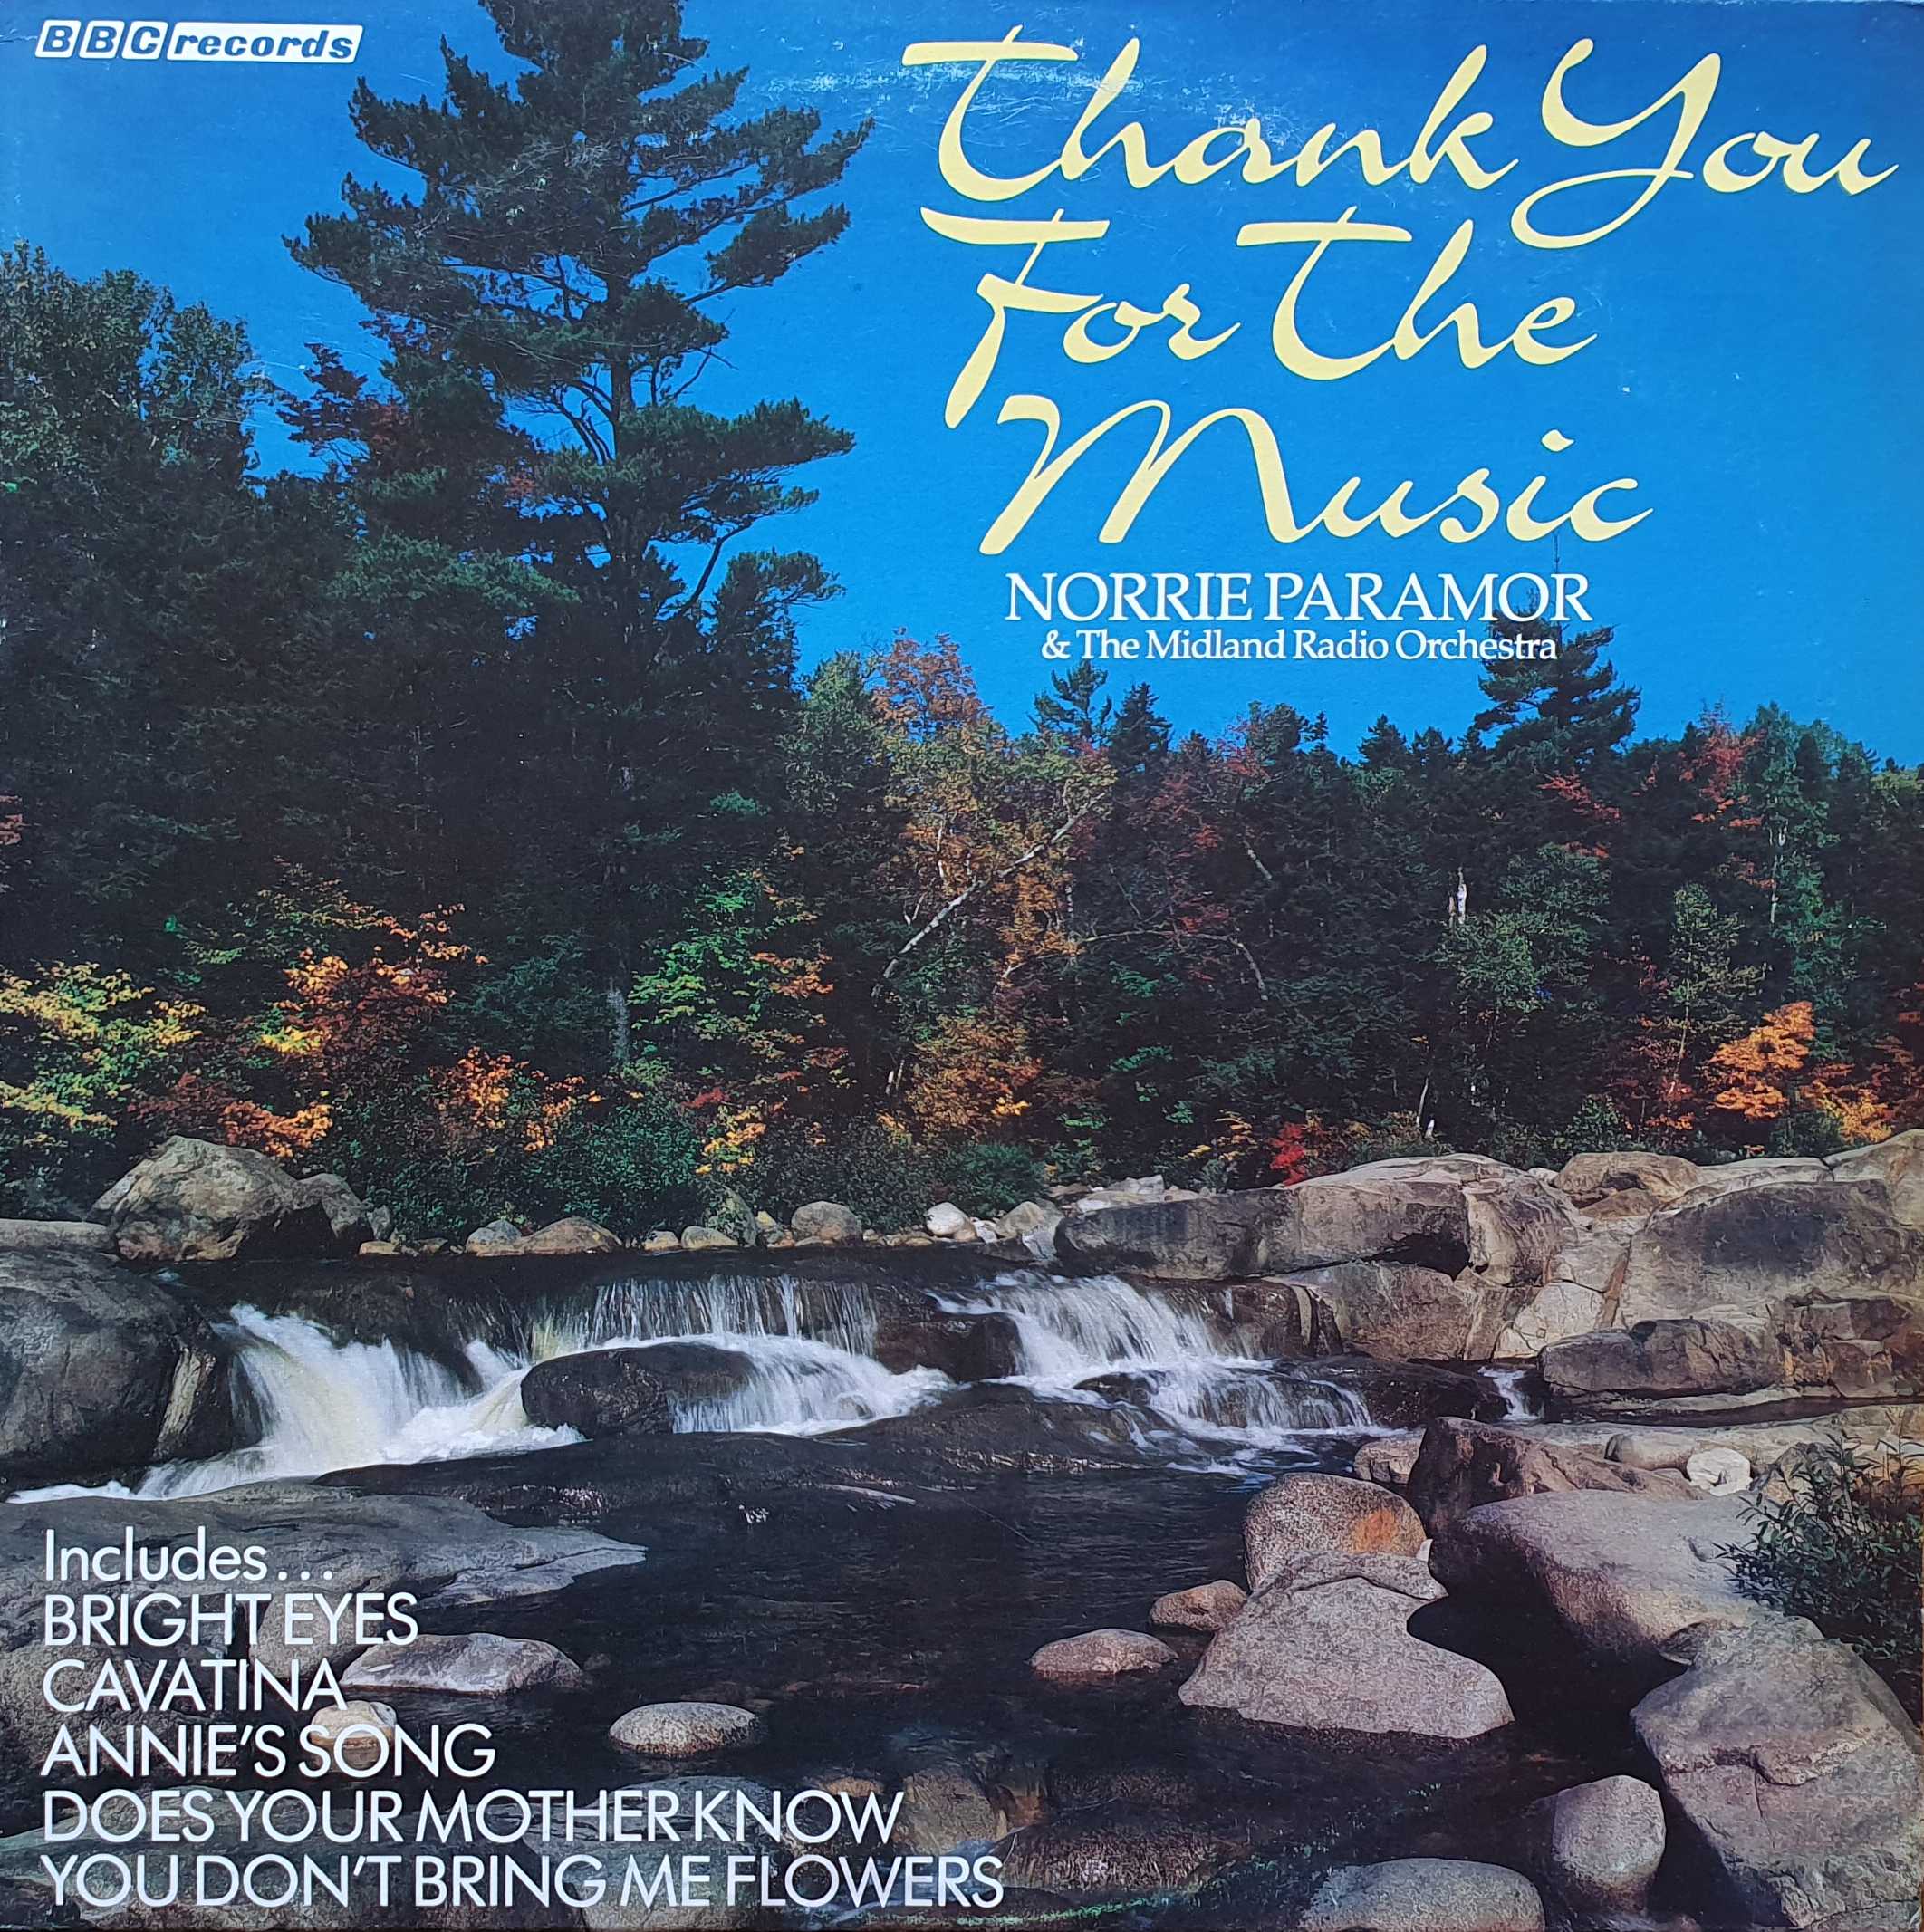 Picture of TRC-SP 1038 Thank you for the music (Canadian import) by artist Norrie Paramor and the Midland Radio Orchestra from the BBC albums - Records and Tapes library